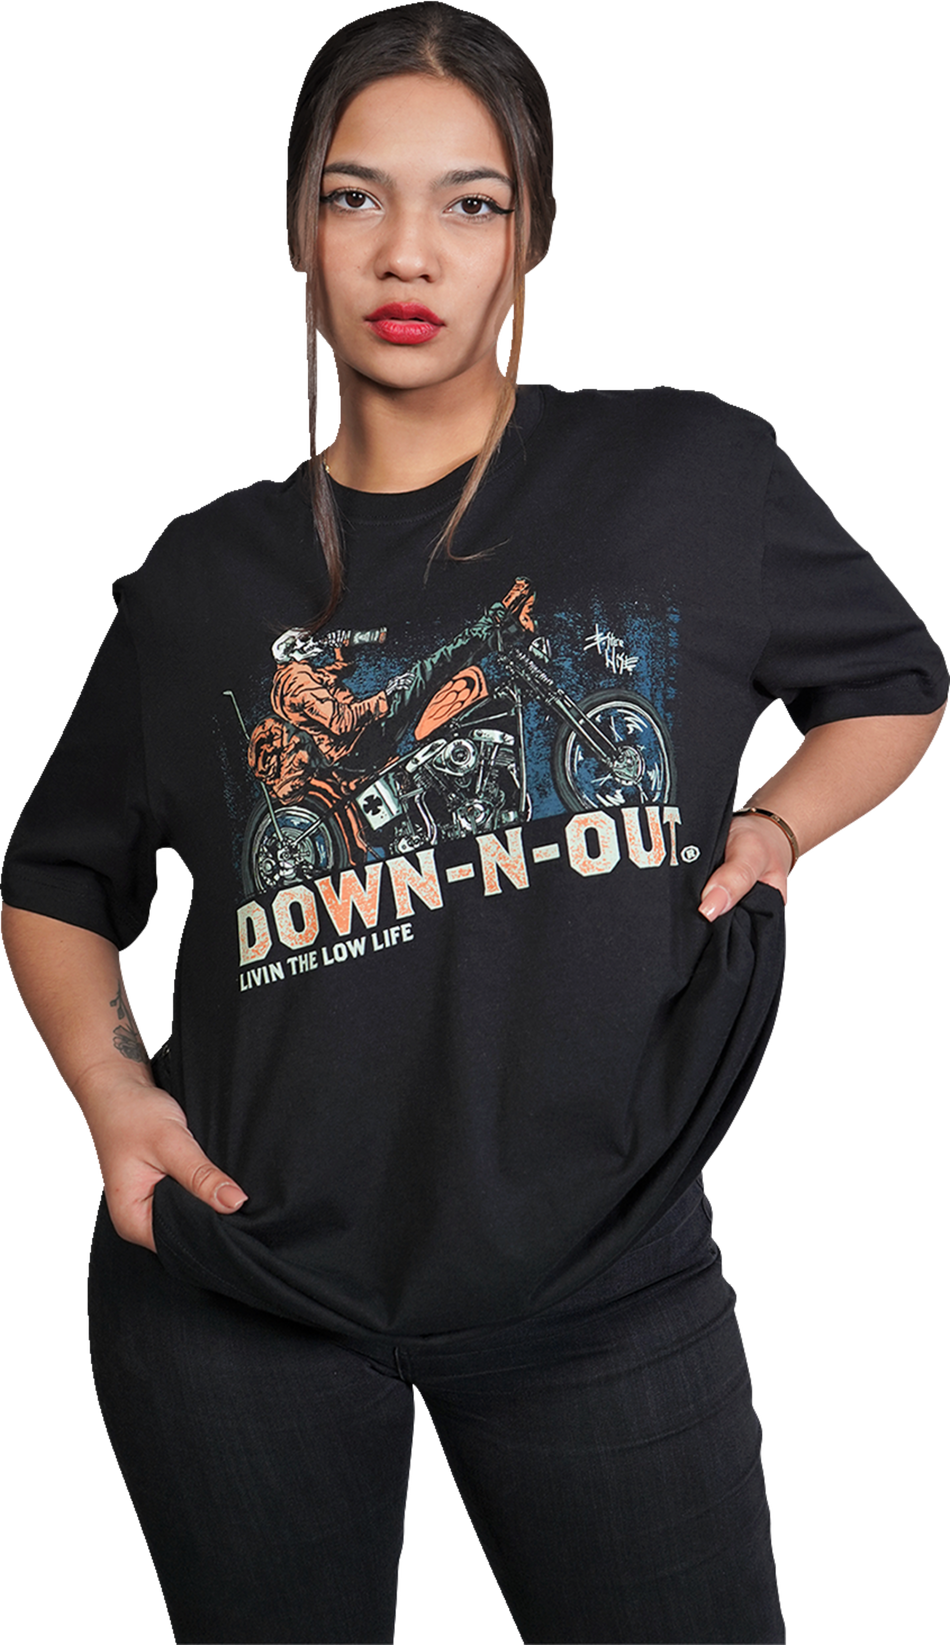 LETHAL THREAT Down-N-Out Party First Safety Second - Black - Large DT10043L